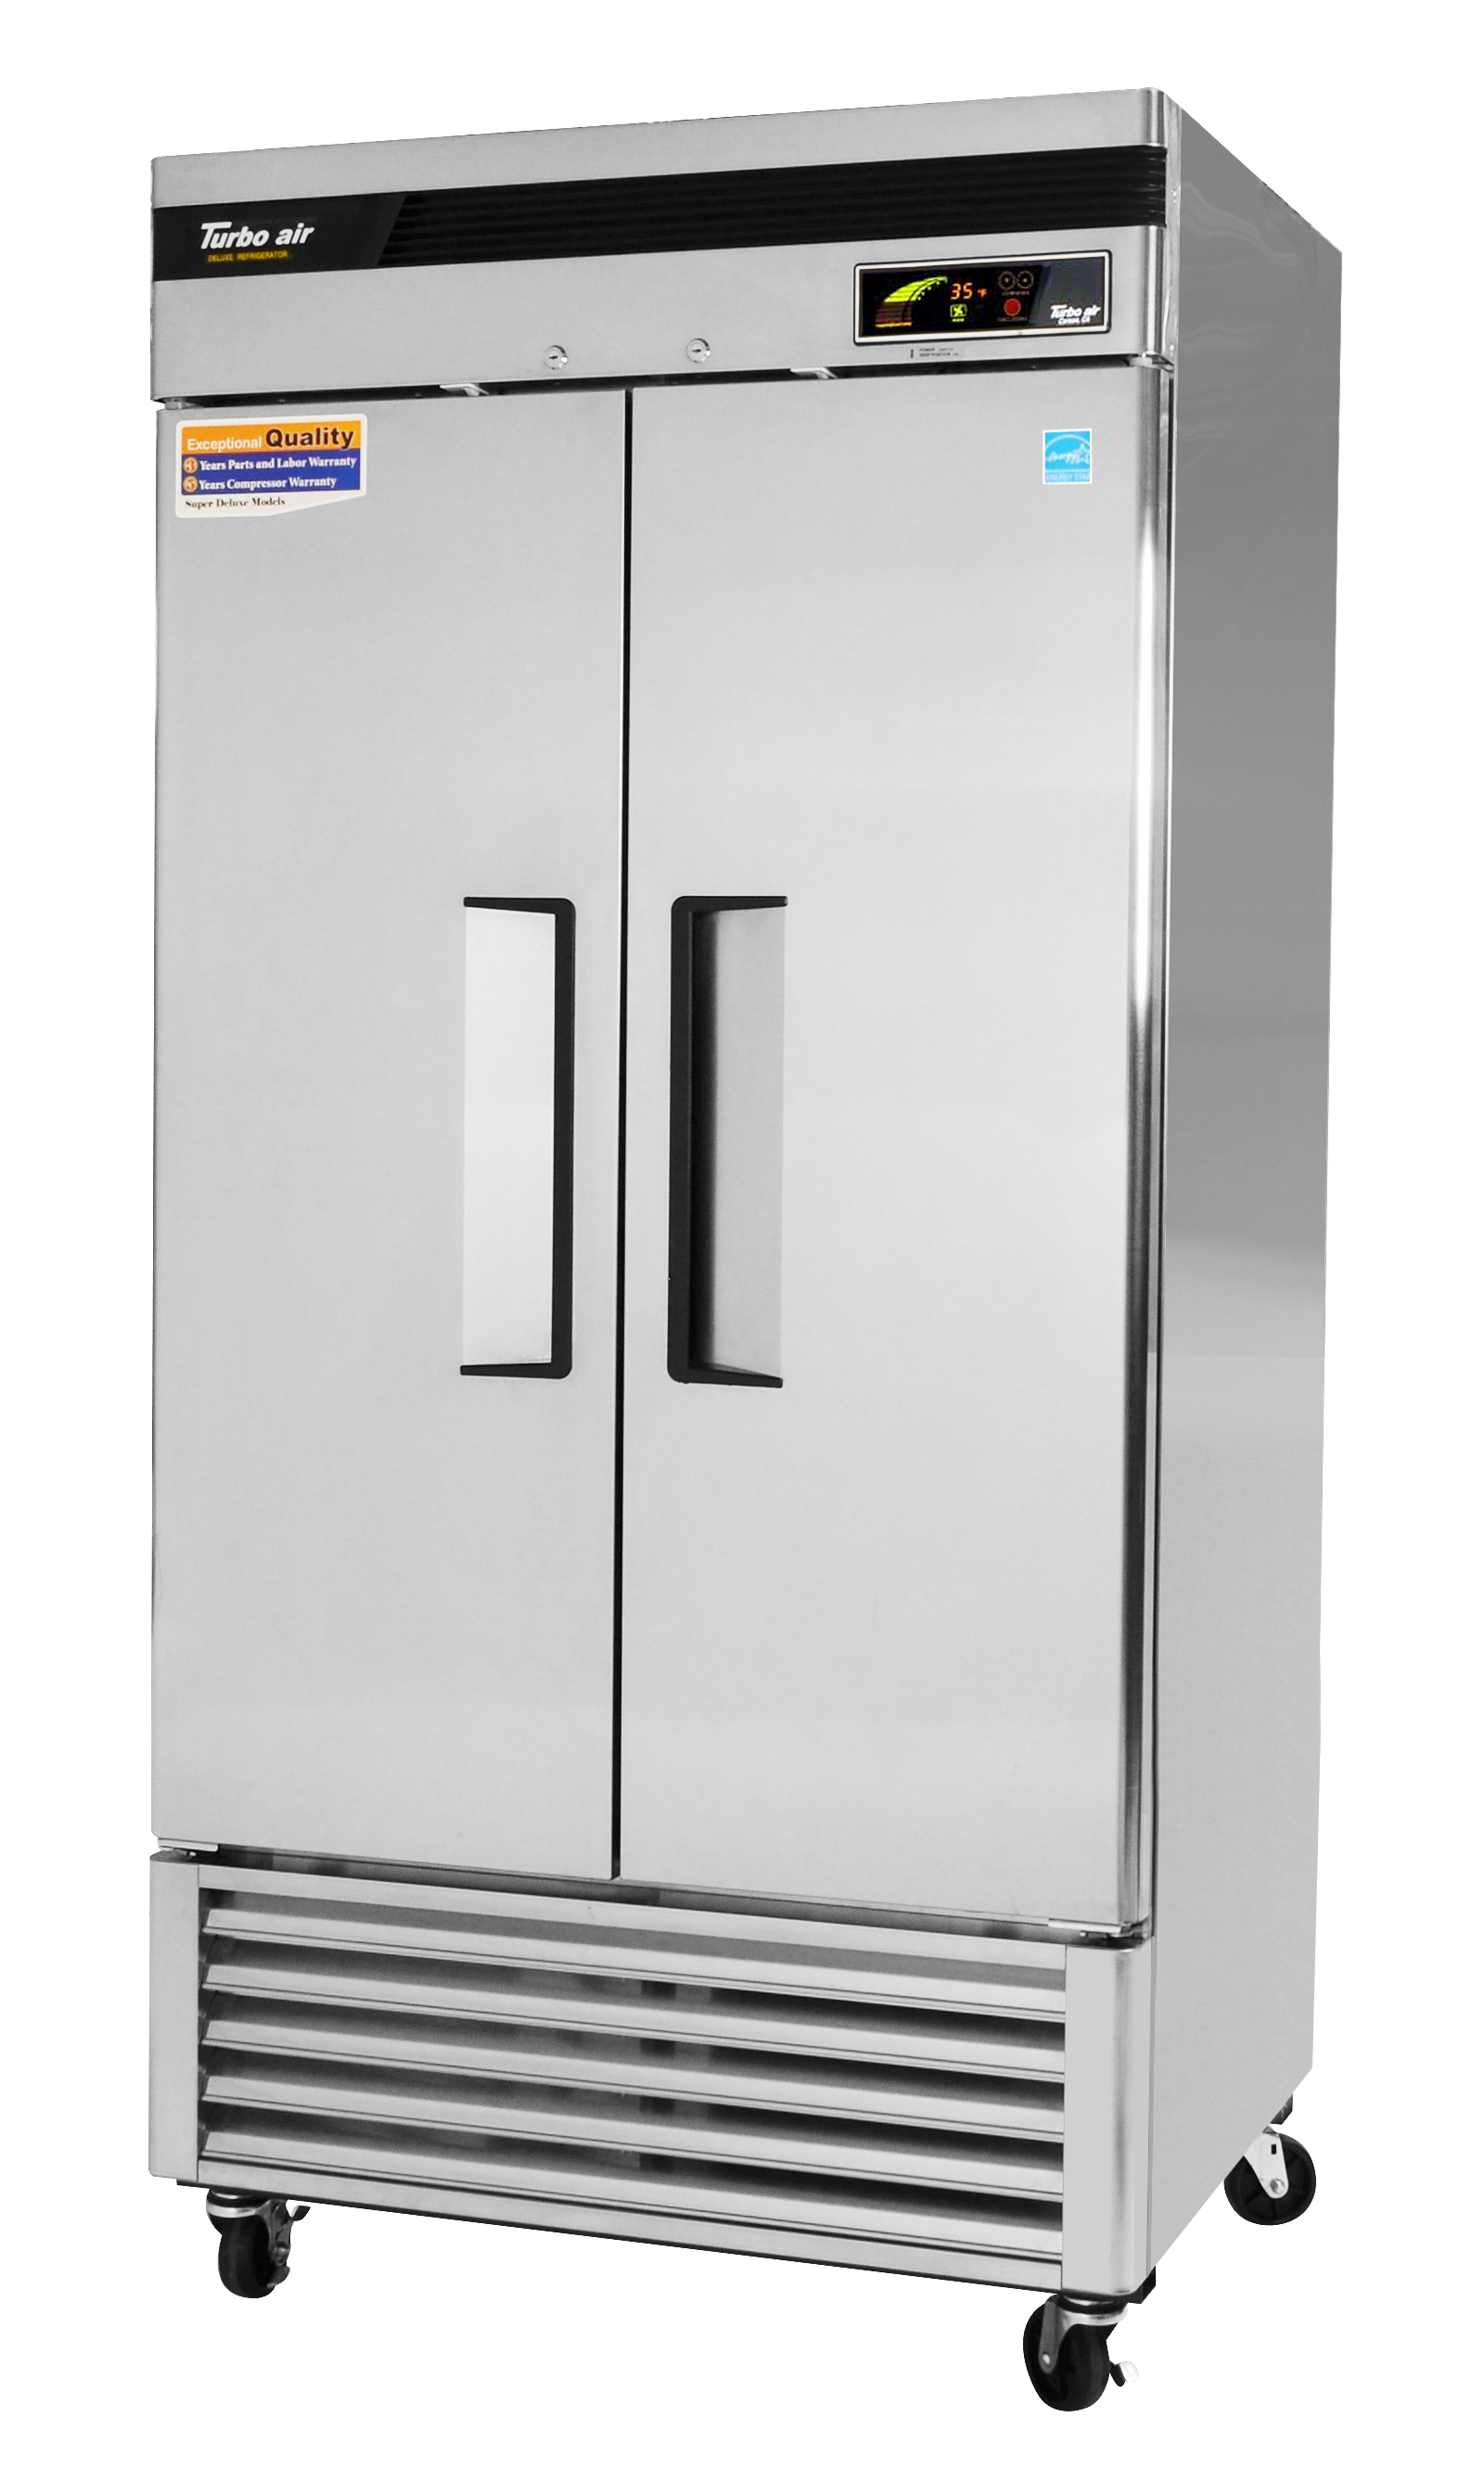 Super Deluxe Refrigerator, reach-in, two-section